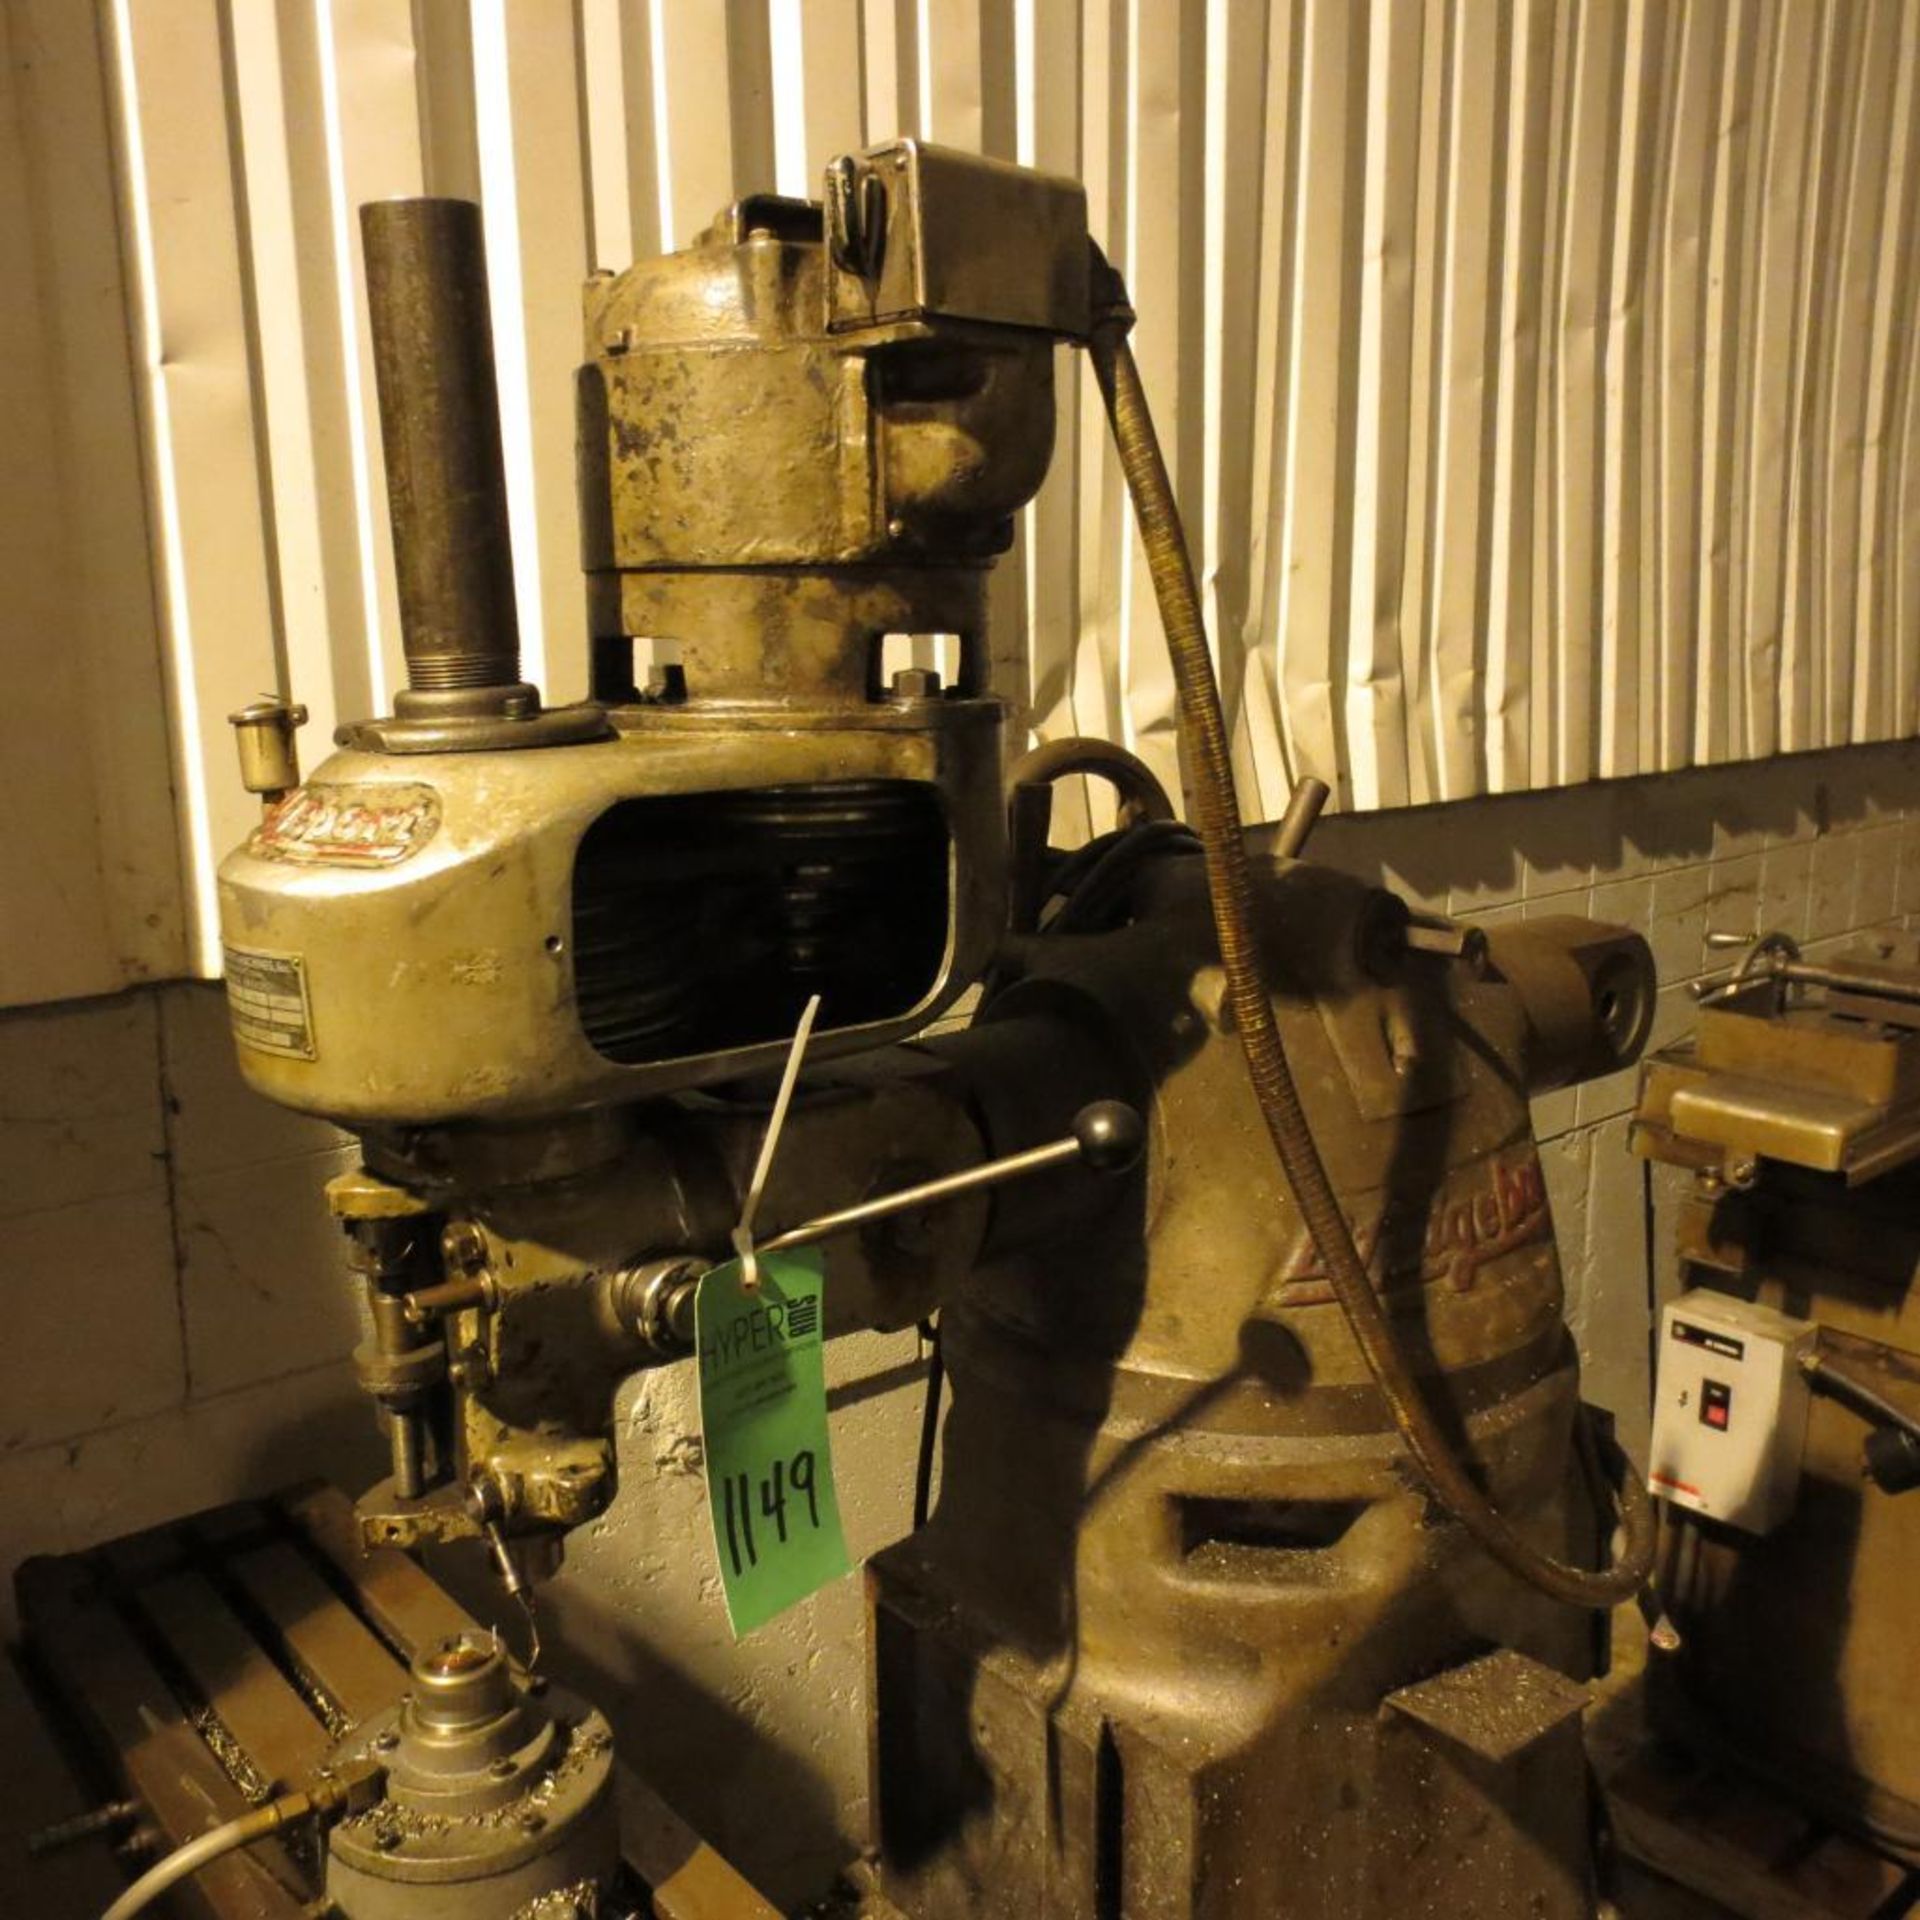 Bridgeport Vertical Milling Machine, 42"x 9" Slotted Table, S/N 4441 *RIGGING $65* - Image 3 of 3